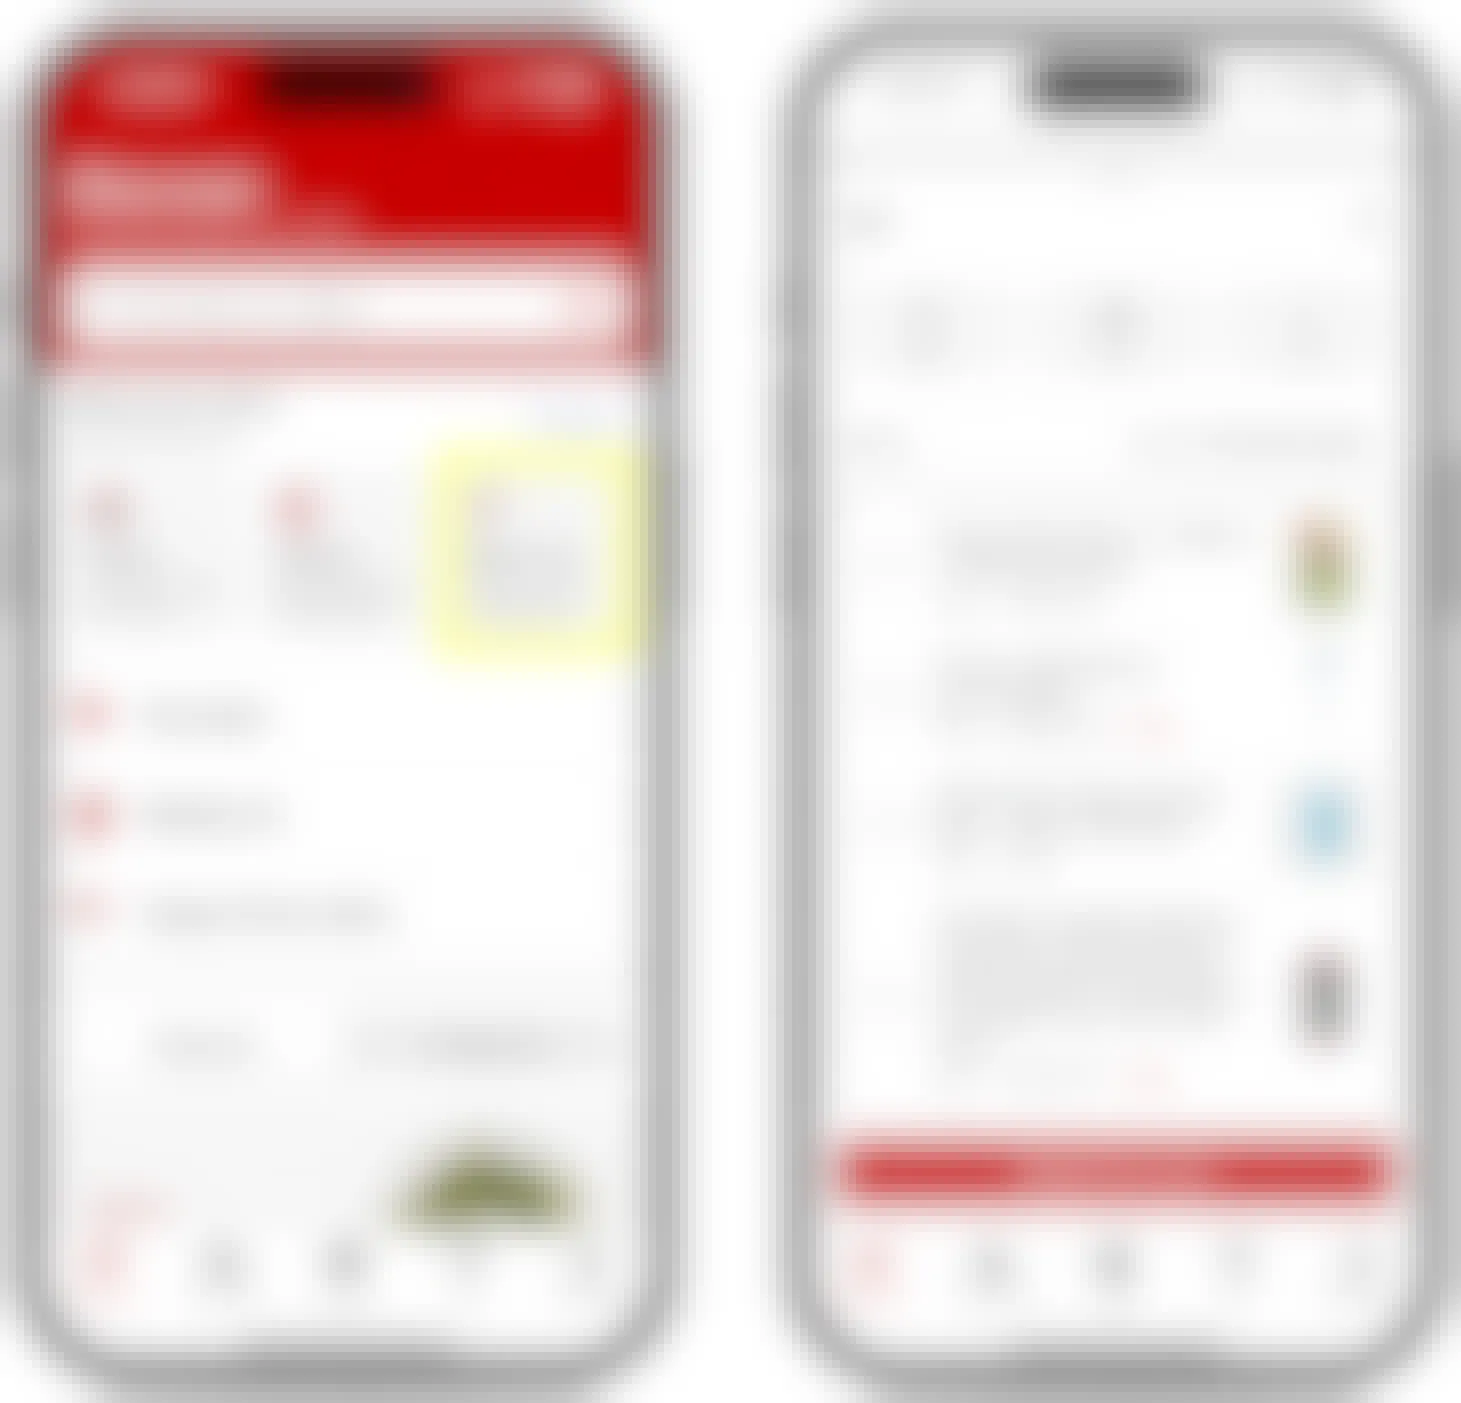 Two smartphone screenshots of the target app: one showing where to tap to start a personal shopping list, the other showing a list of items and the option to add them to your target cart